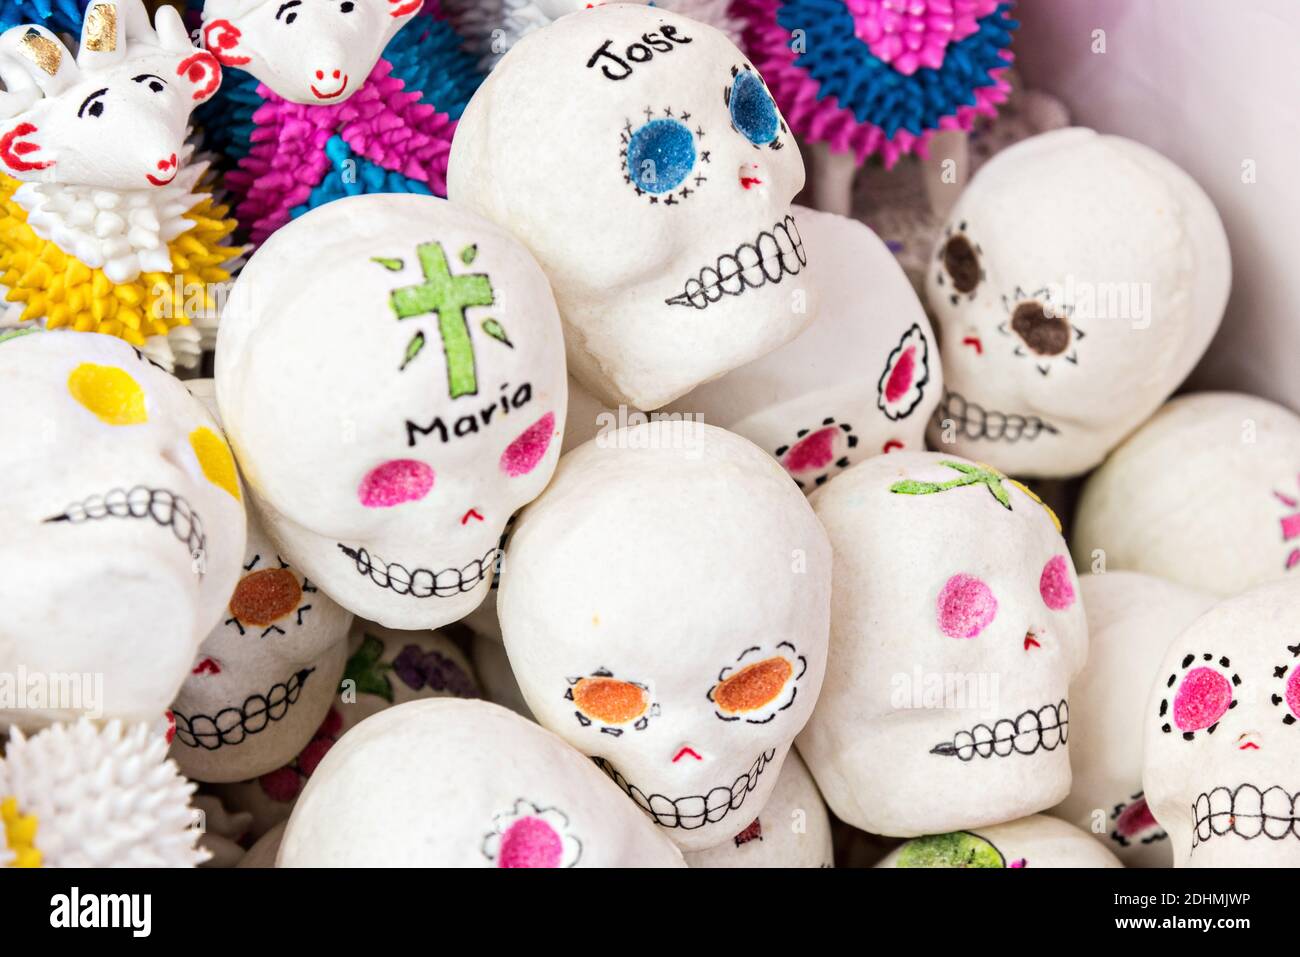 Sugar skulls on sale for the Day of the Dead or Día de Muertos festival October 29, 2017 in San Miguel de Allende, Guanajuato, Mexico. The festival has been celebrated since the Aztec empire celebrates ancestors and deceased loved ones. Stock Photo